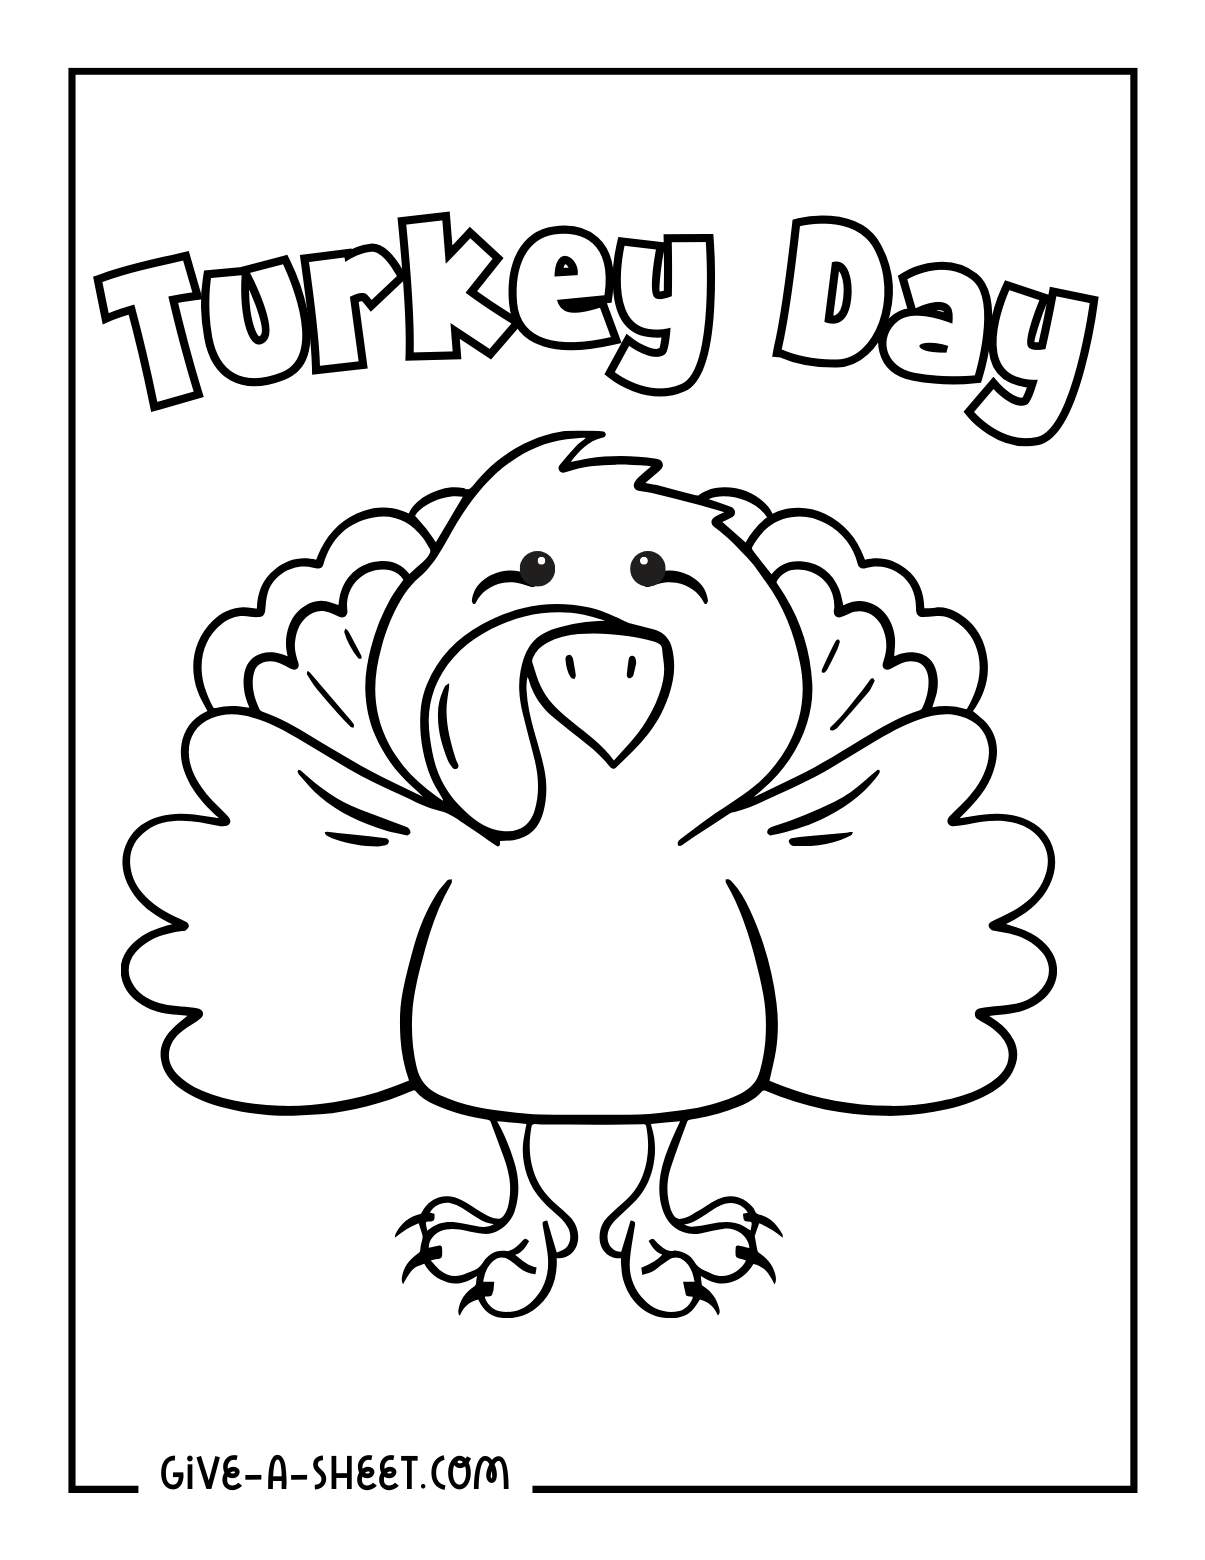 Easy turkey outline to color for kids of all ages.